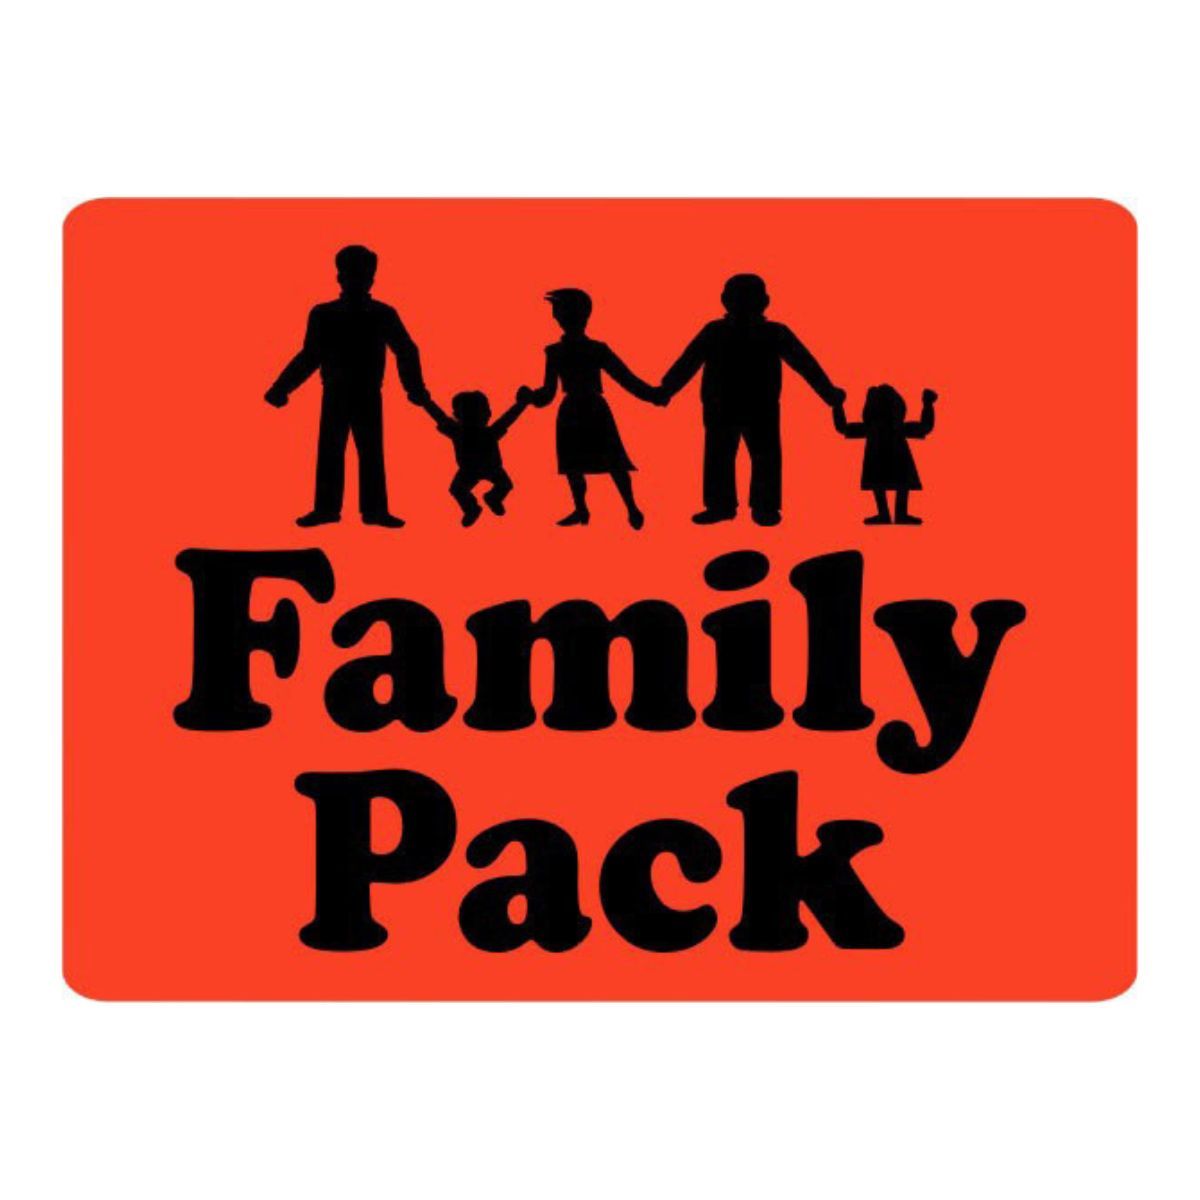 Bollin Label 10053 - Family Pack (w/ People) Black on Red 1.5 in. x 2.0 in. - Roll of 1000